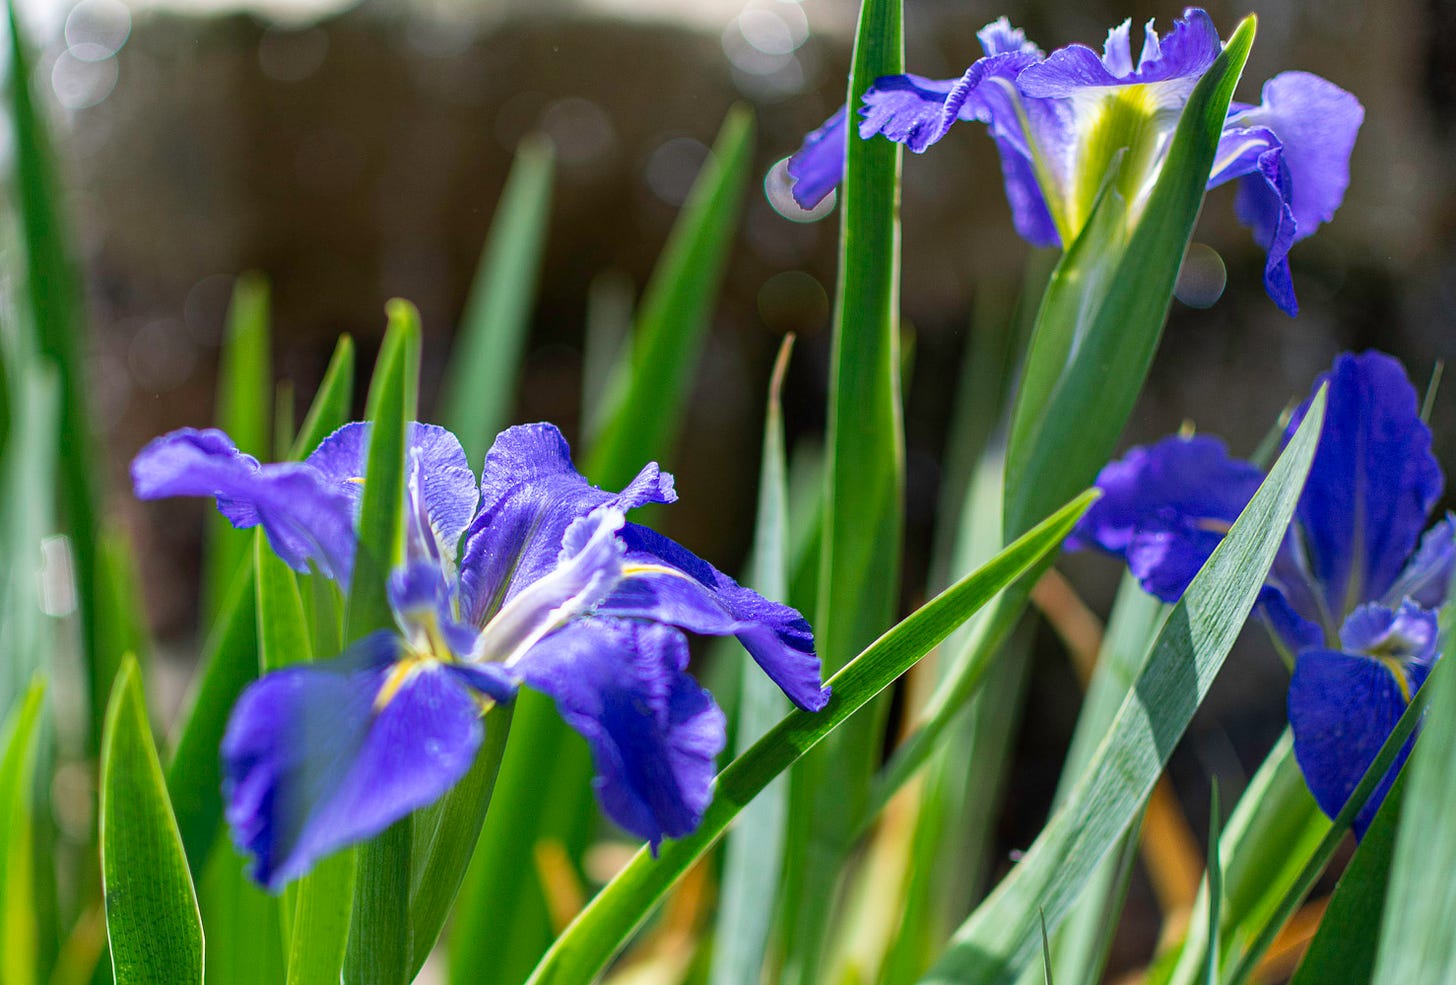 three purple iris with green stems and a blurred background